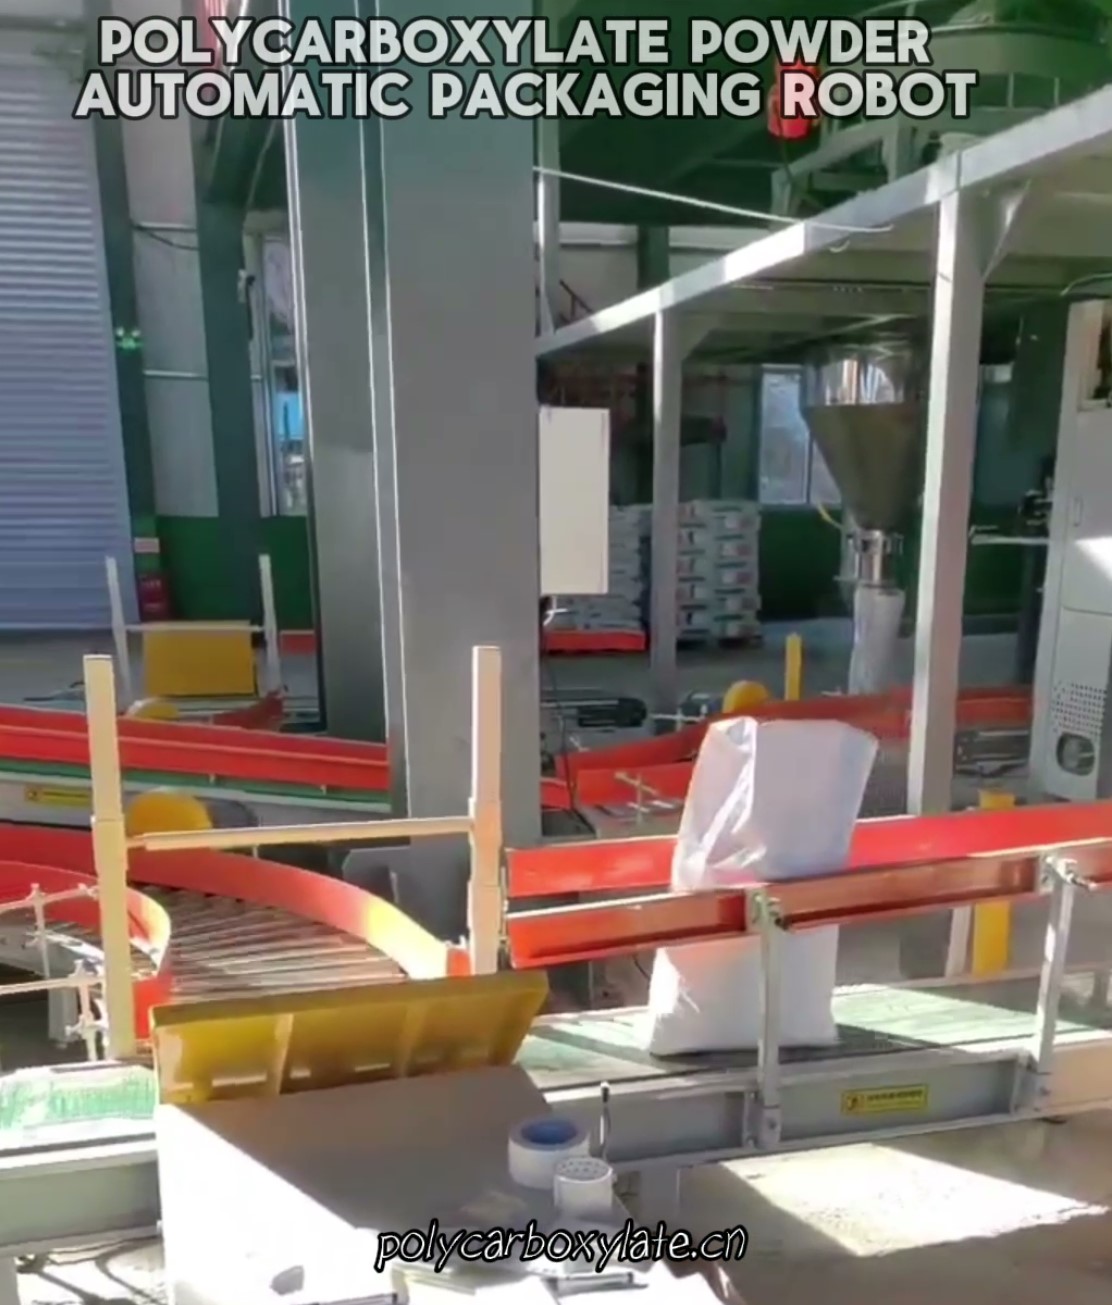 Polycarboxylate Powder Automatic Packaging Robot